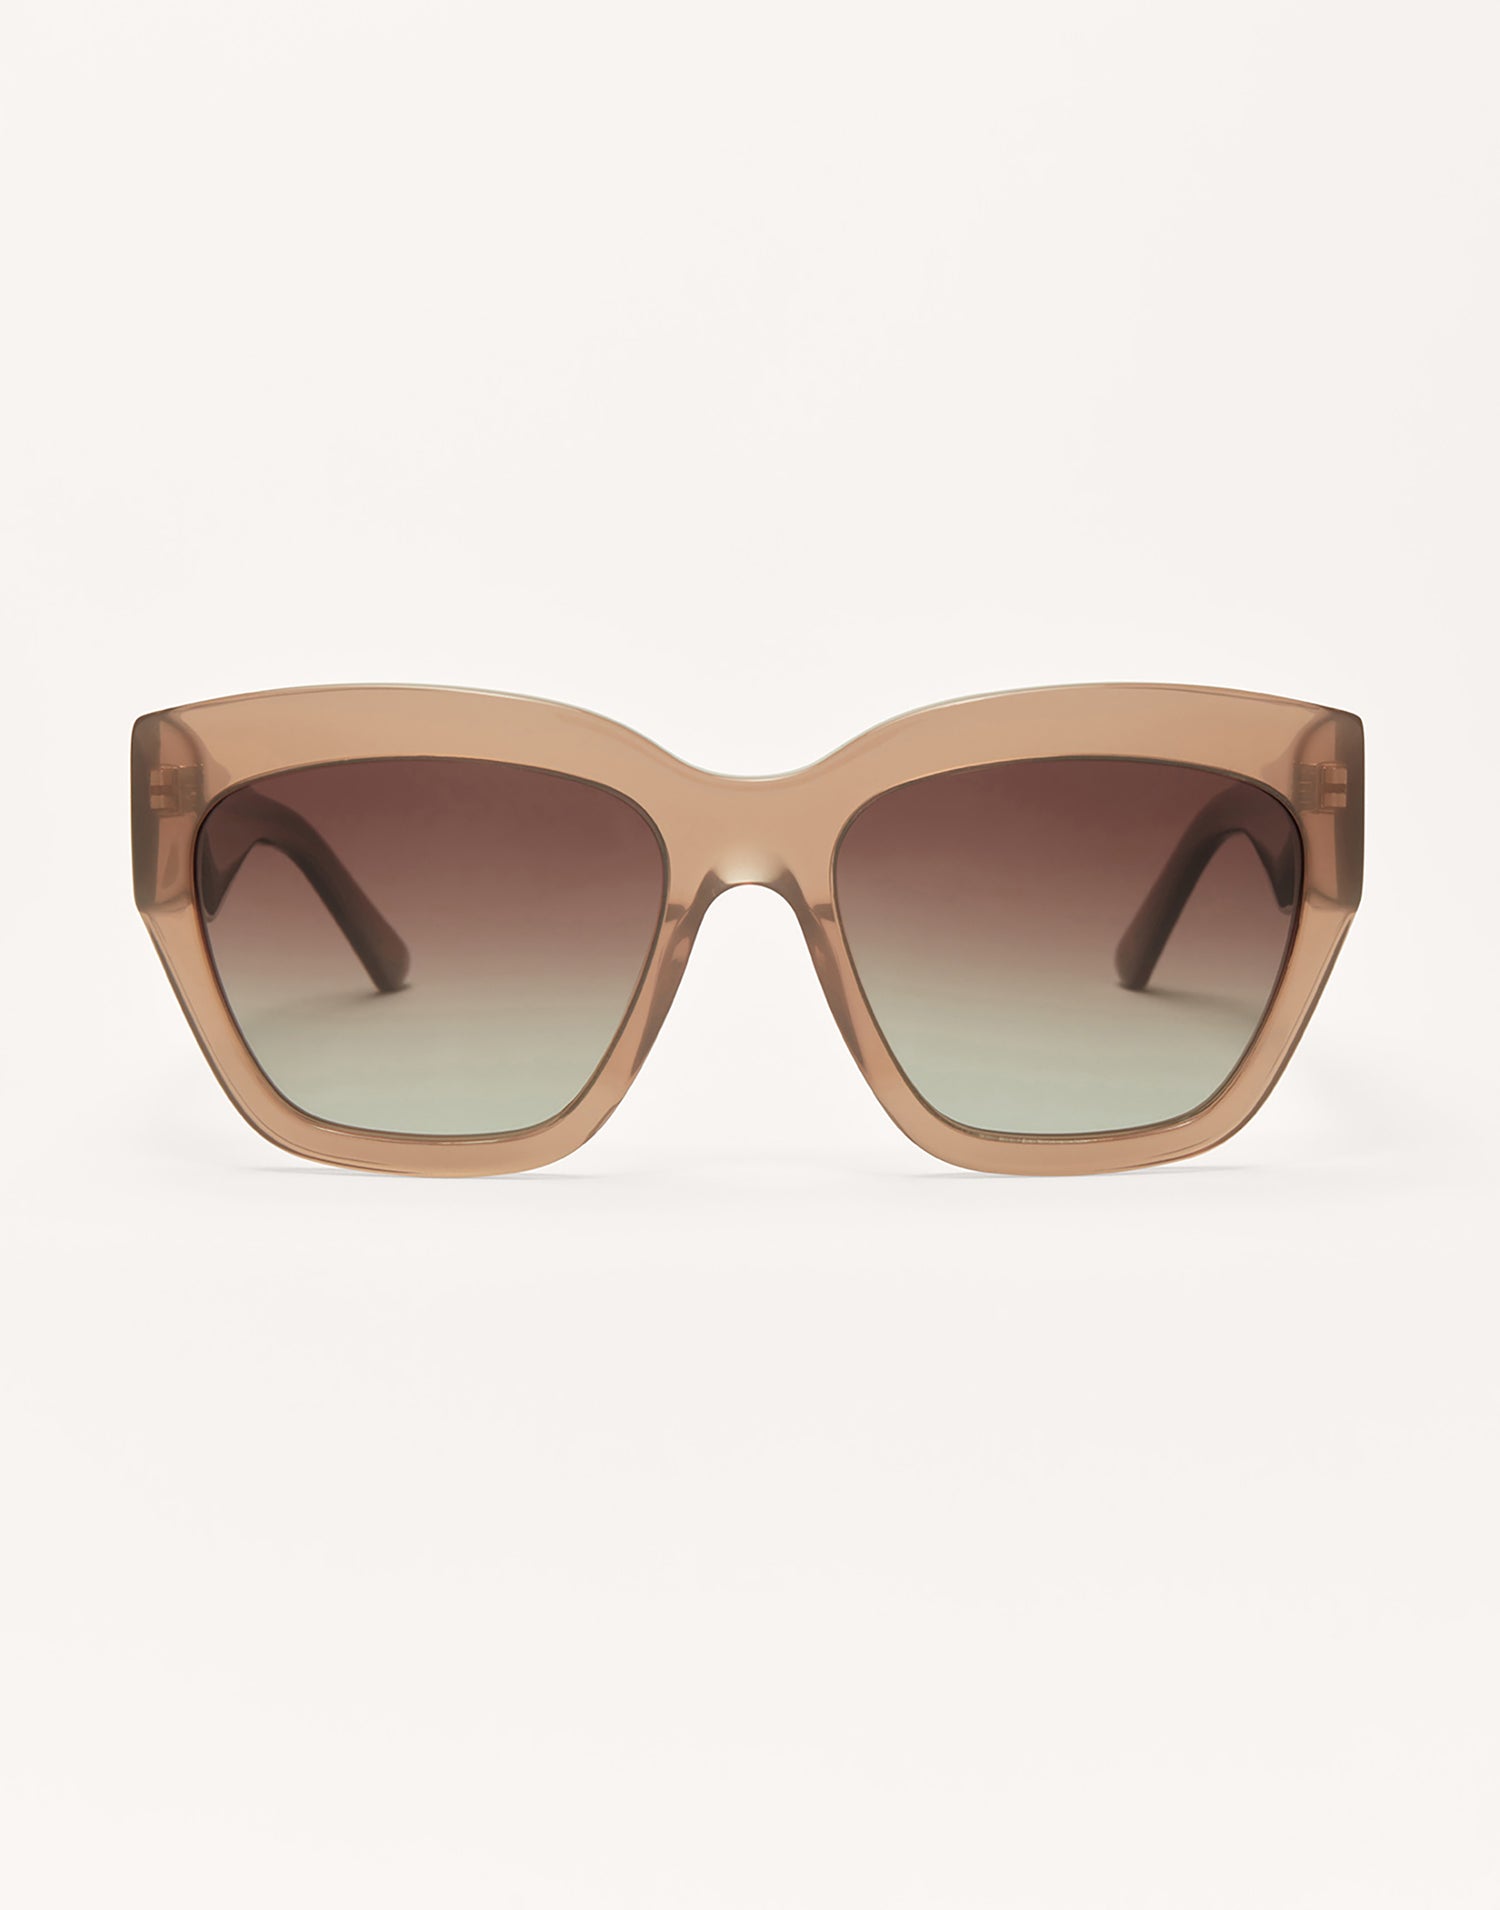 Iconic Sunglasses by Z Supply in Taupe - Front View